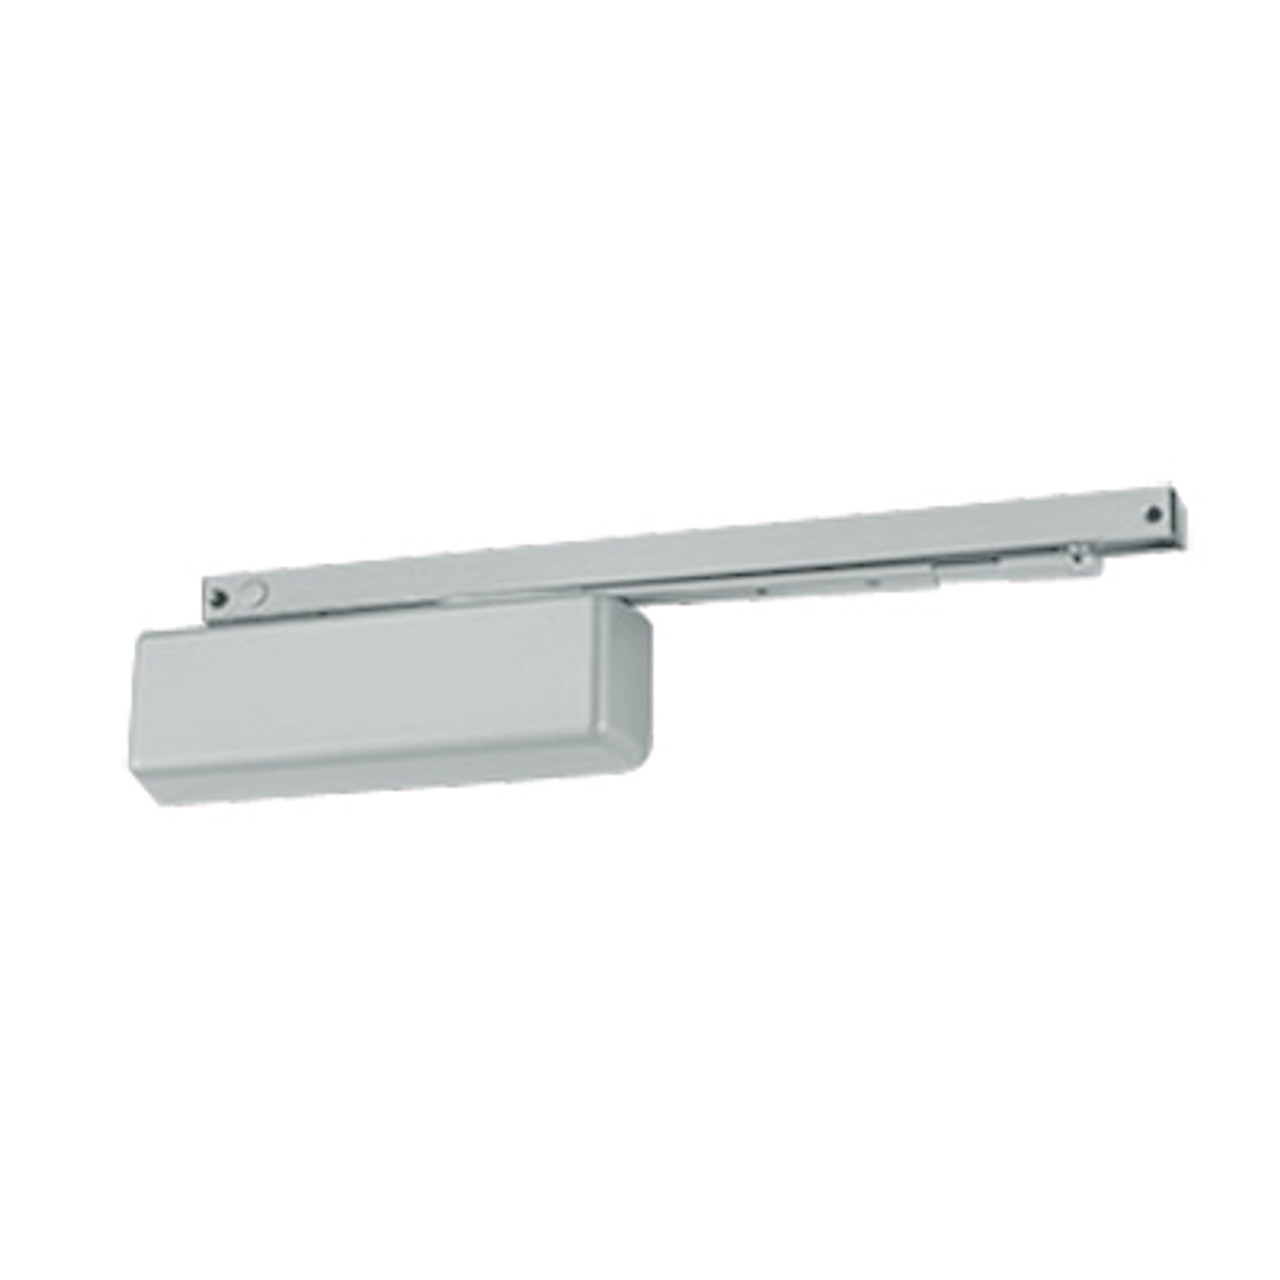 3134SE-LONG-RH-120V-AC/DC-US26 LCN Door Closer with Long Arm in Bright Chrome Finish